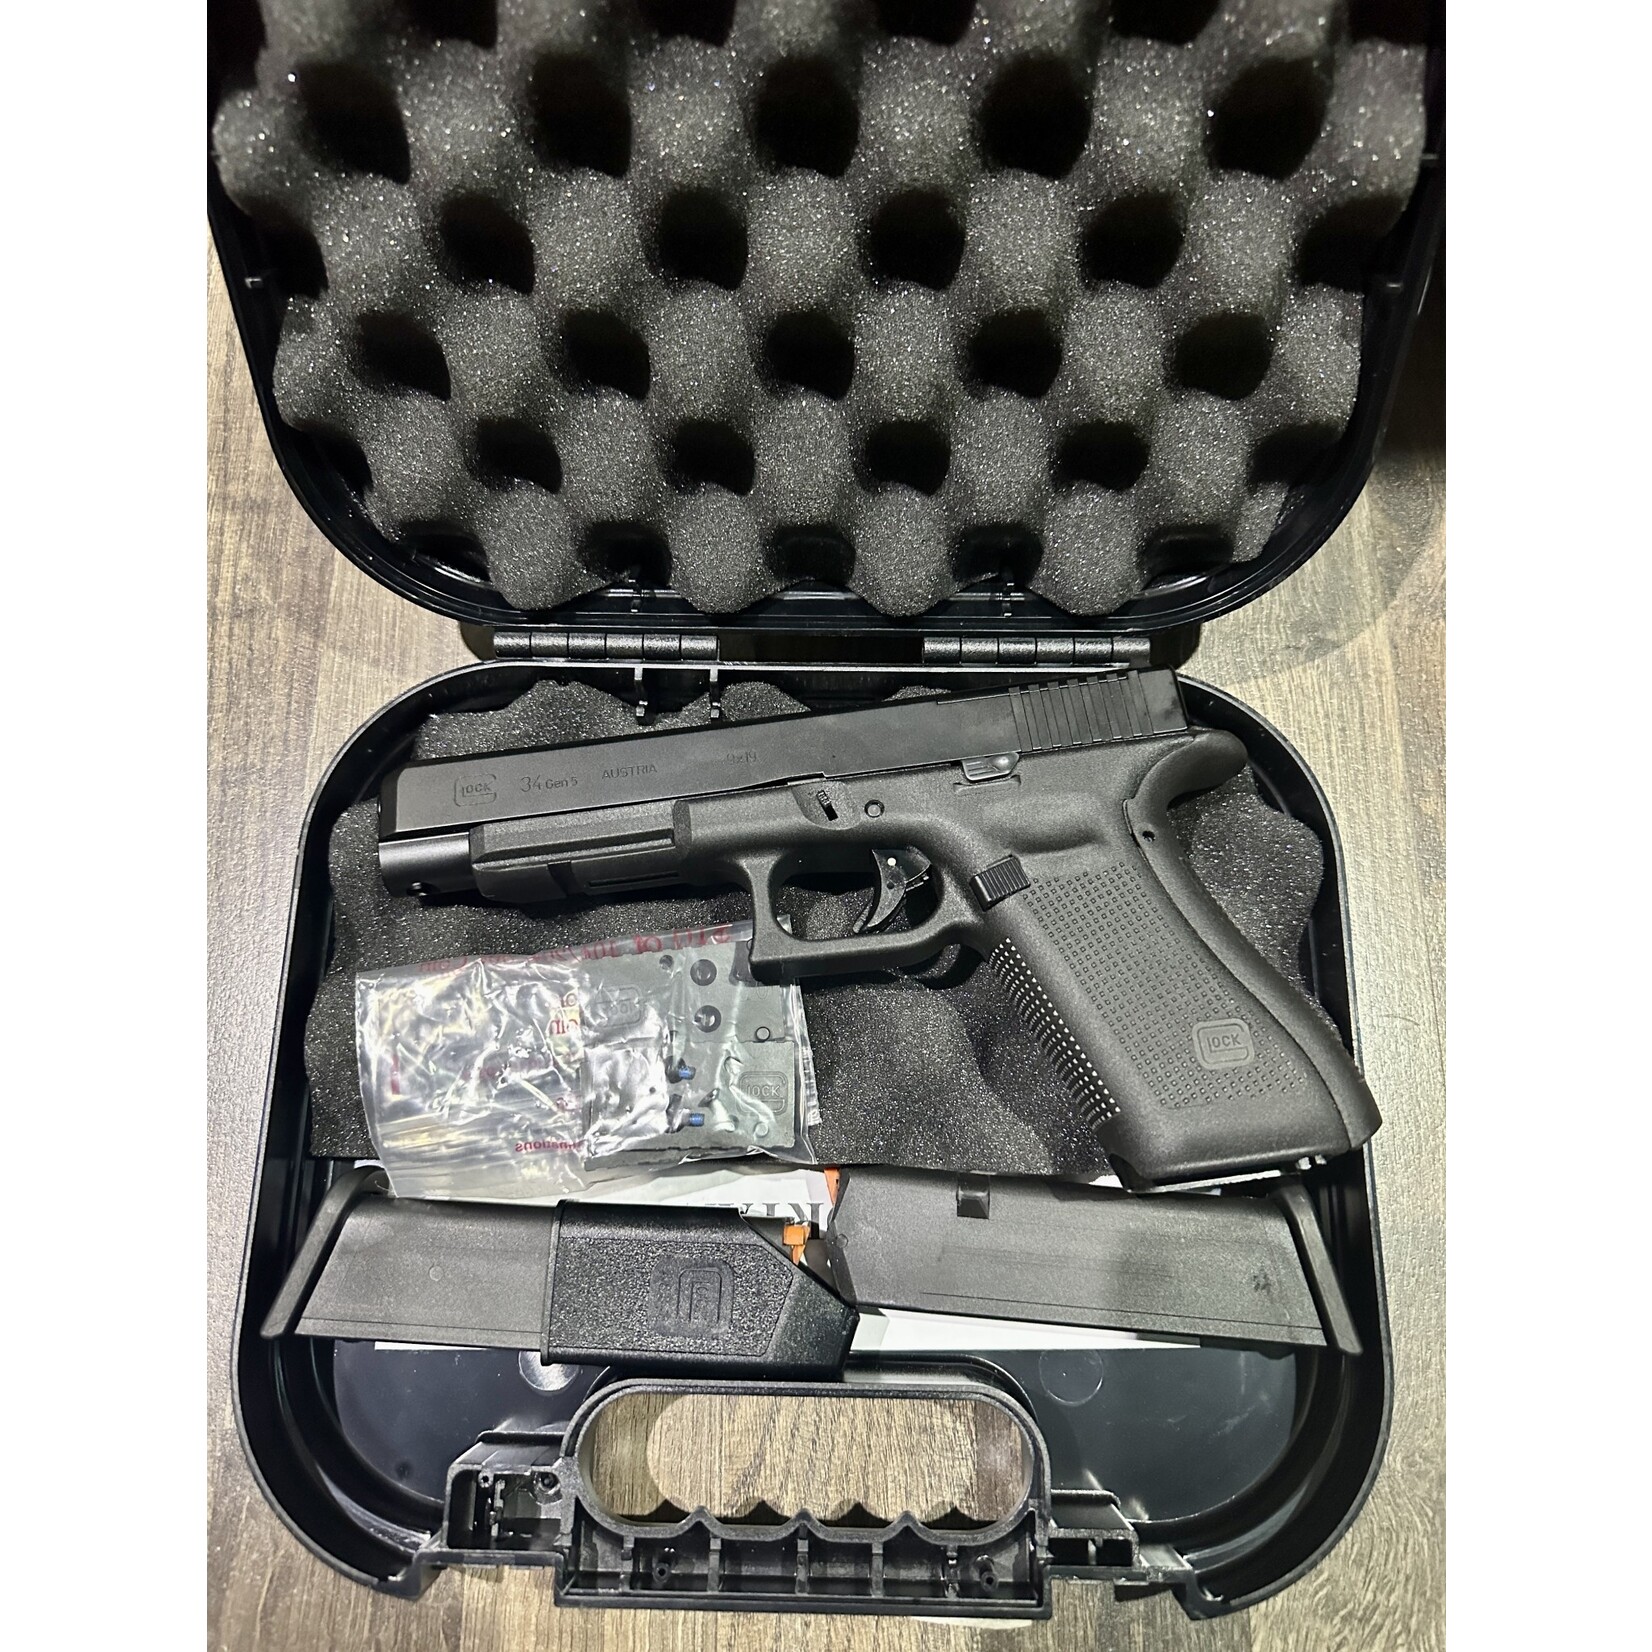 Glock Pre Owned 9mm Glock 34 Gen 5, 2 Mags, Hard Case, 4 optic plates - 135mm